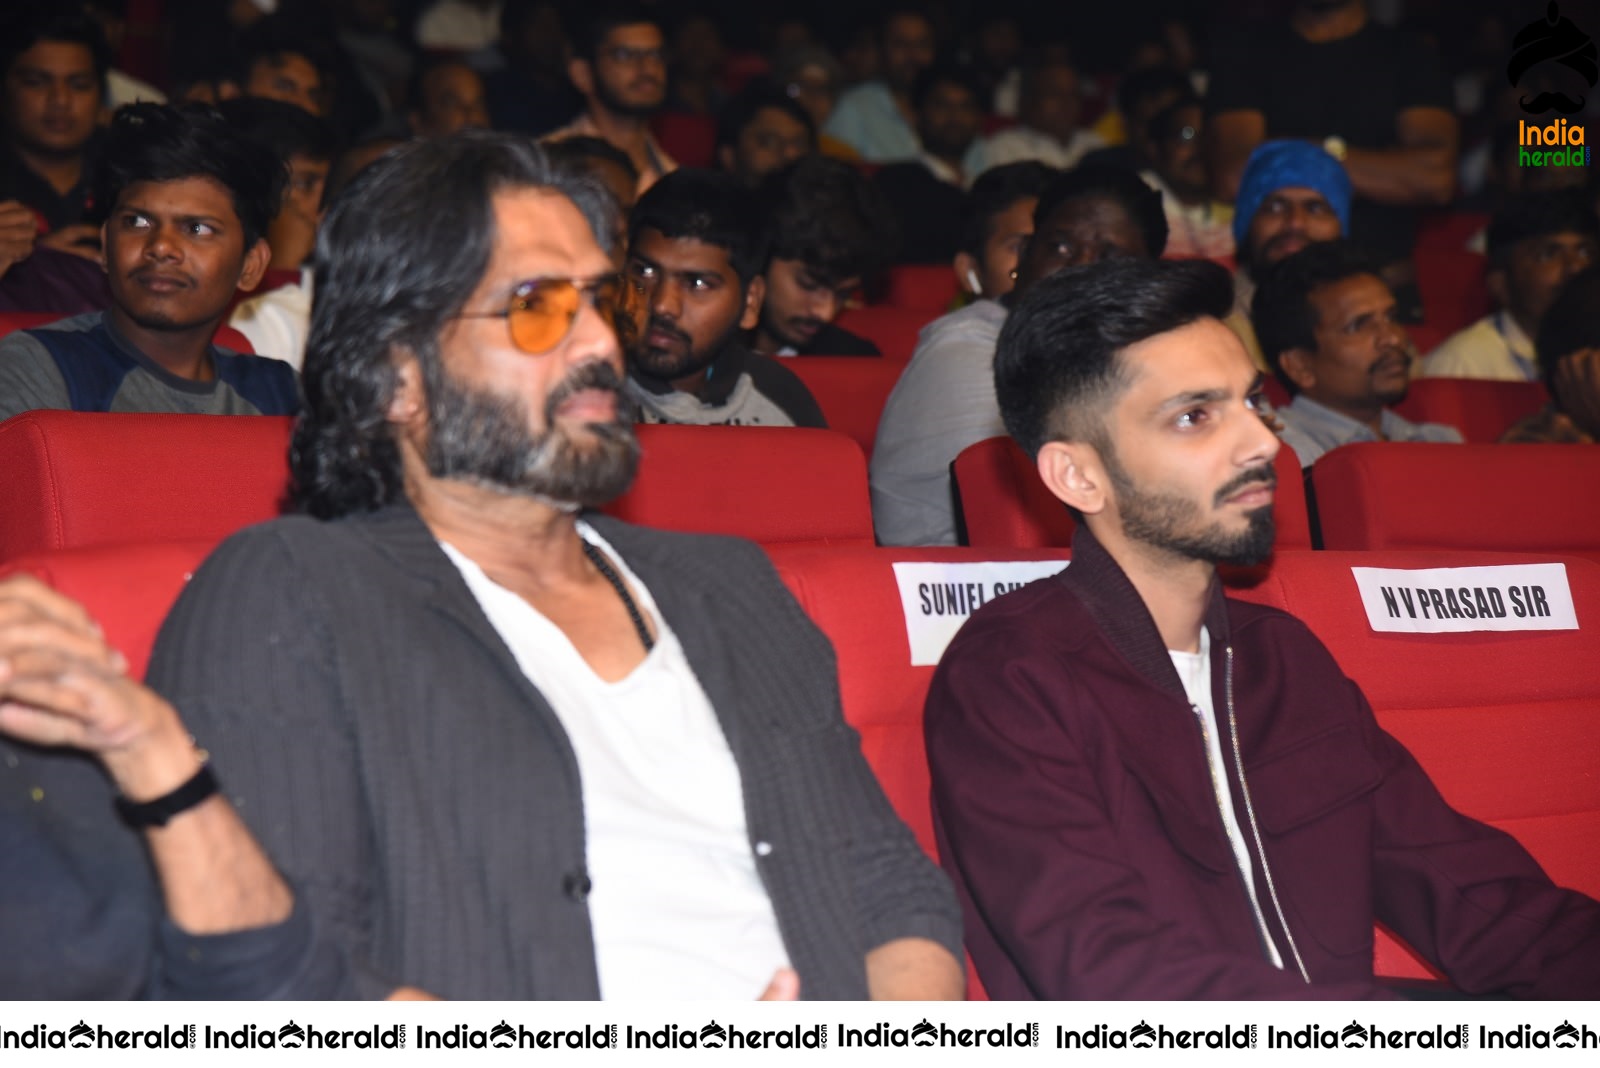 Some Unseen Candid Clicks During Darbar Event Set 1